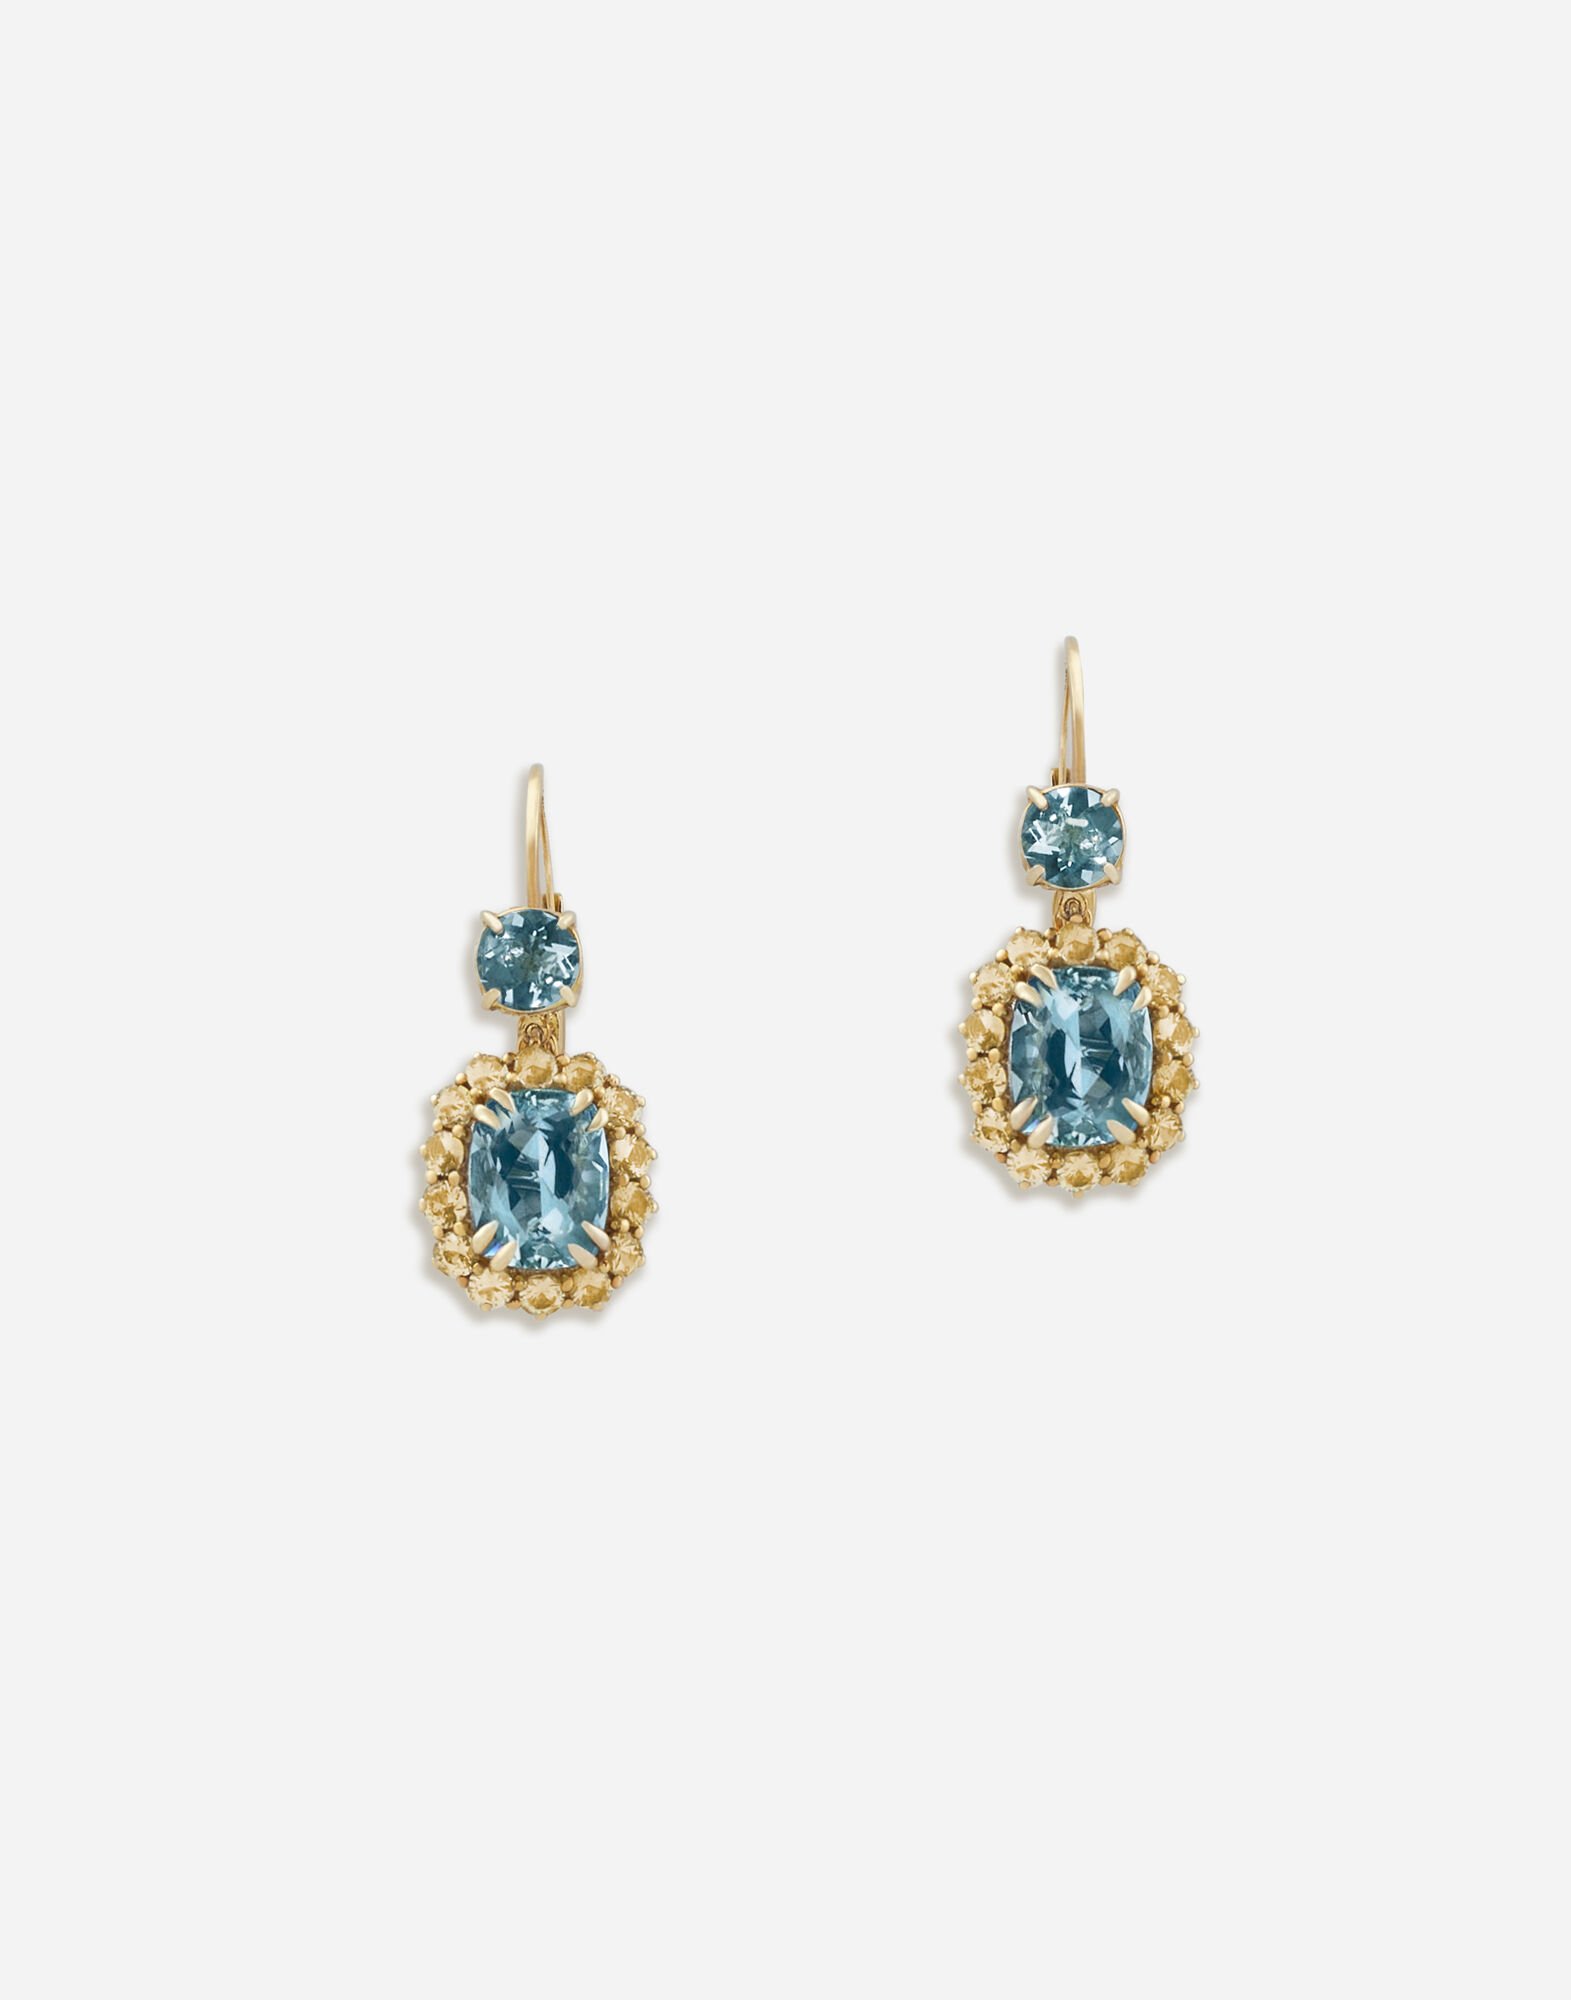 Dolce & Gabbana Herritage earrings in yellow gold with aquamarines and yellow sapphires Red WSQB1GWQM01